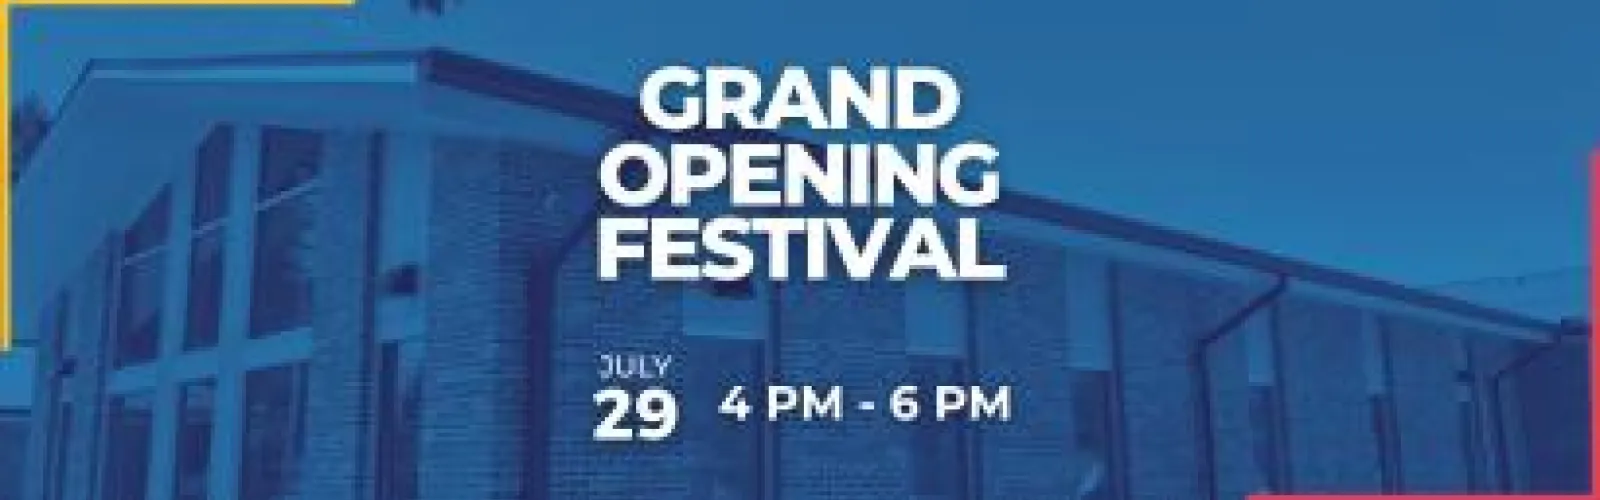 Grand Opening Festival 4 PM - 6 PM July 29th